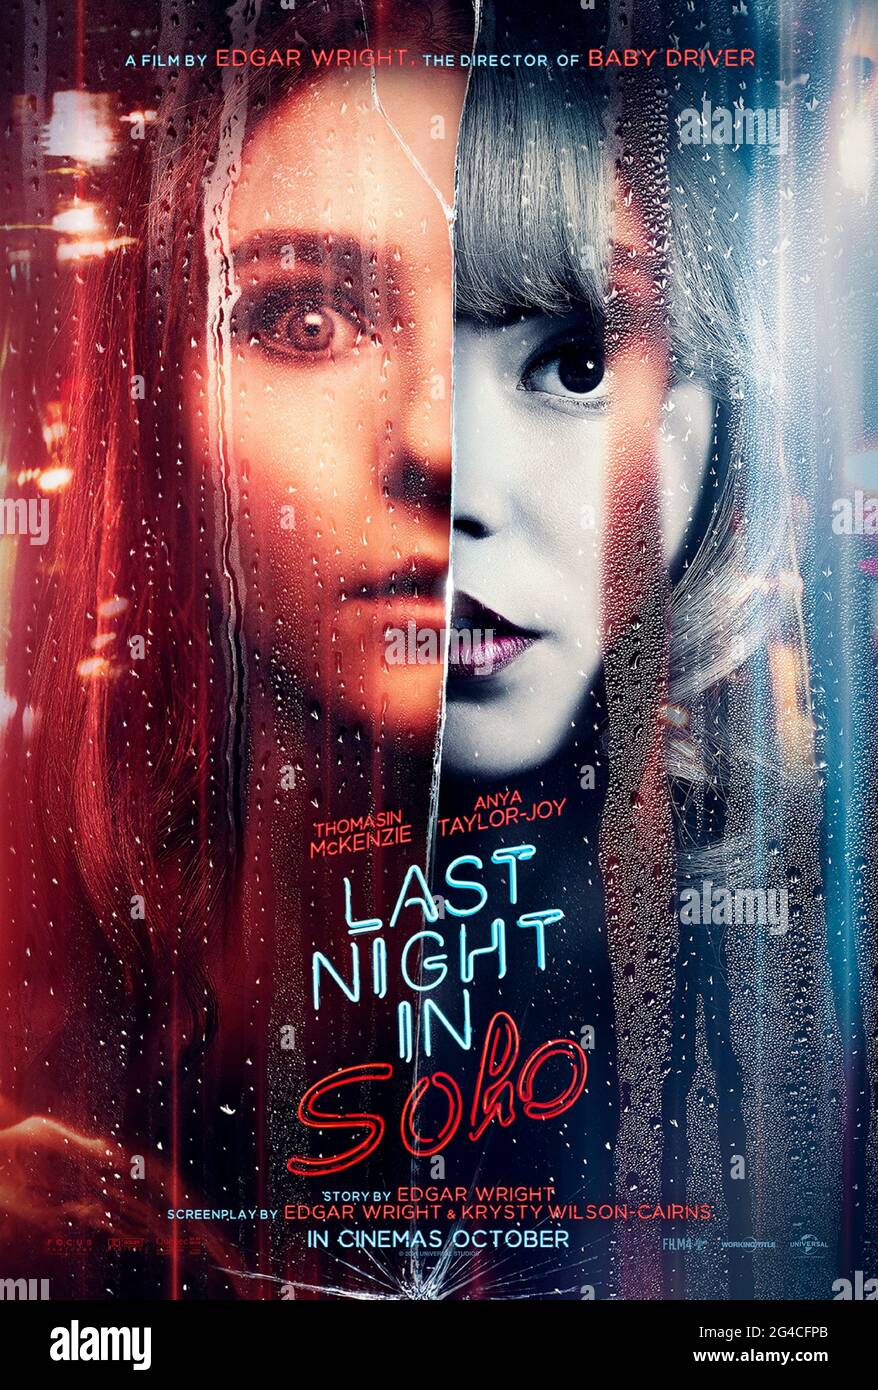 Last Night in Soho (2021) directed by Edgar Wright and starring Anya Taylor-Joy, Thomasin McKenzie and Jessie Mei Li. A young fashion designer connects across time with a singer in the 1960s with unexpected consequences. Stock Photo